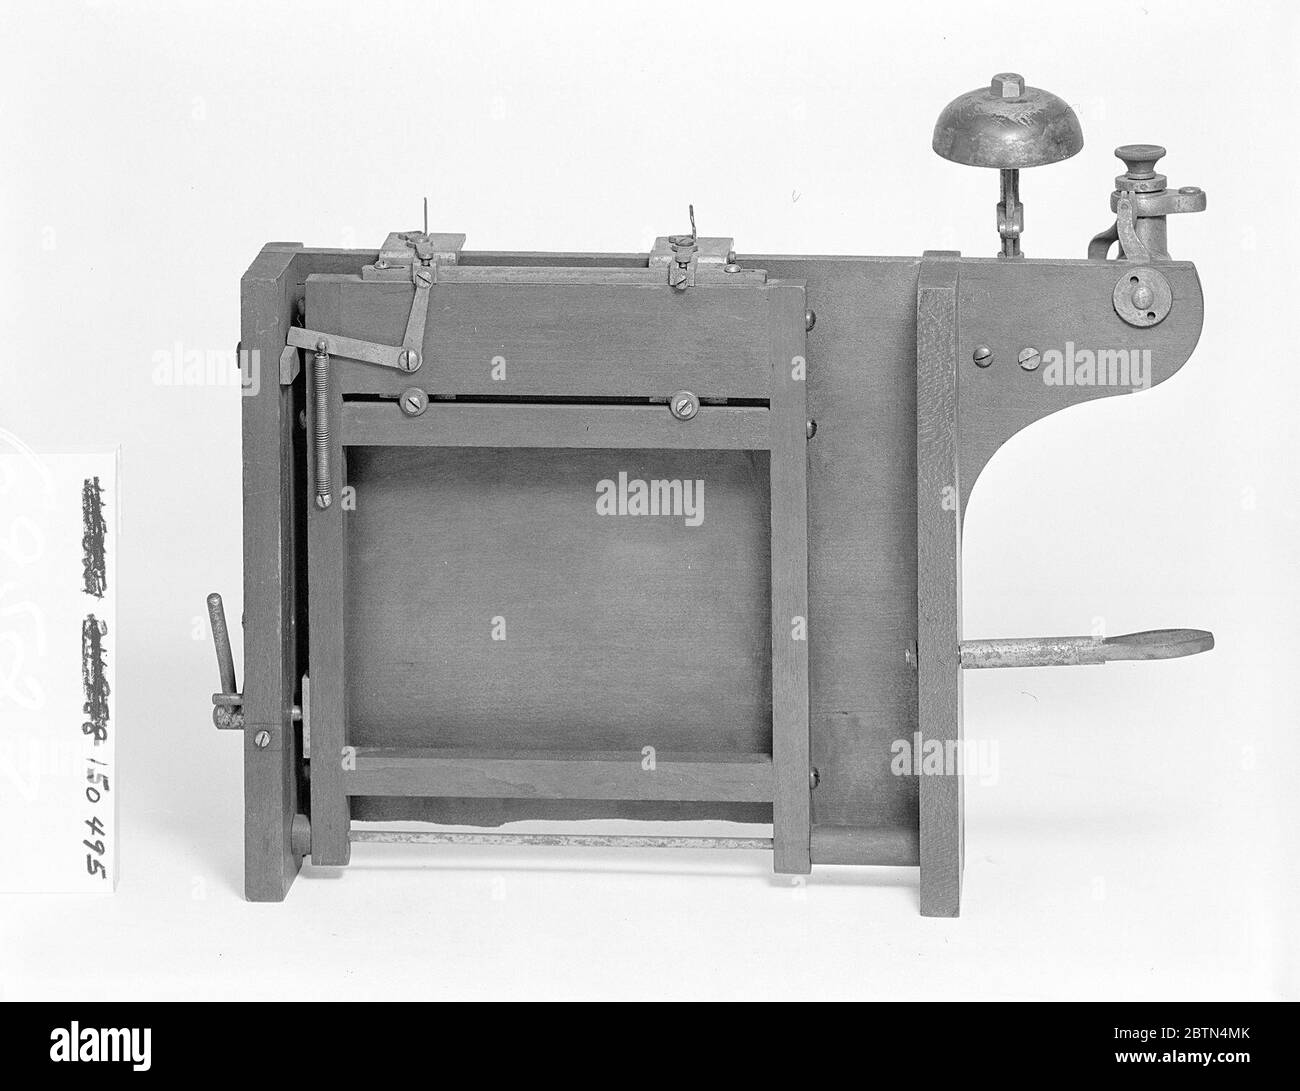 Patent Model of a Bookstitching Machine. This patent model demonstrates an invention for a book-stitching machine which was granted patent number 150495. Stock Photo